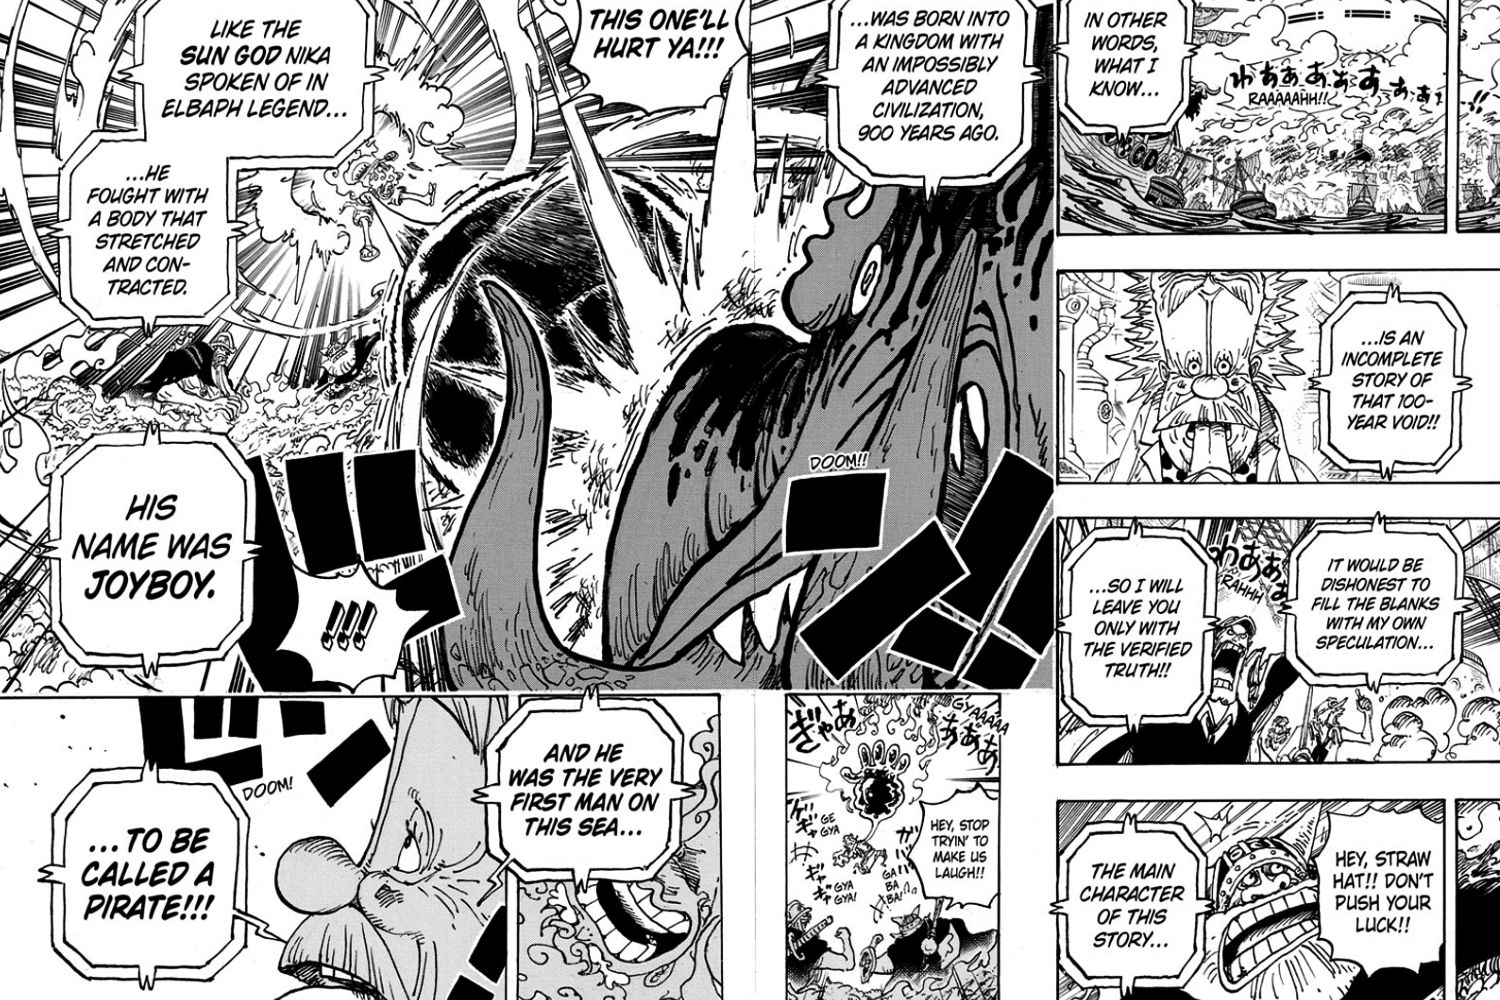 vegapunk's message reveals joyboy was from the ancient kingdom as luffy tries punching warcury again in one piece